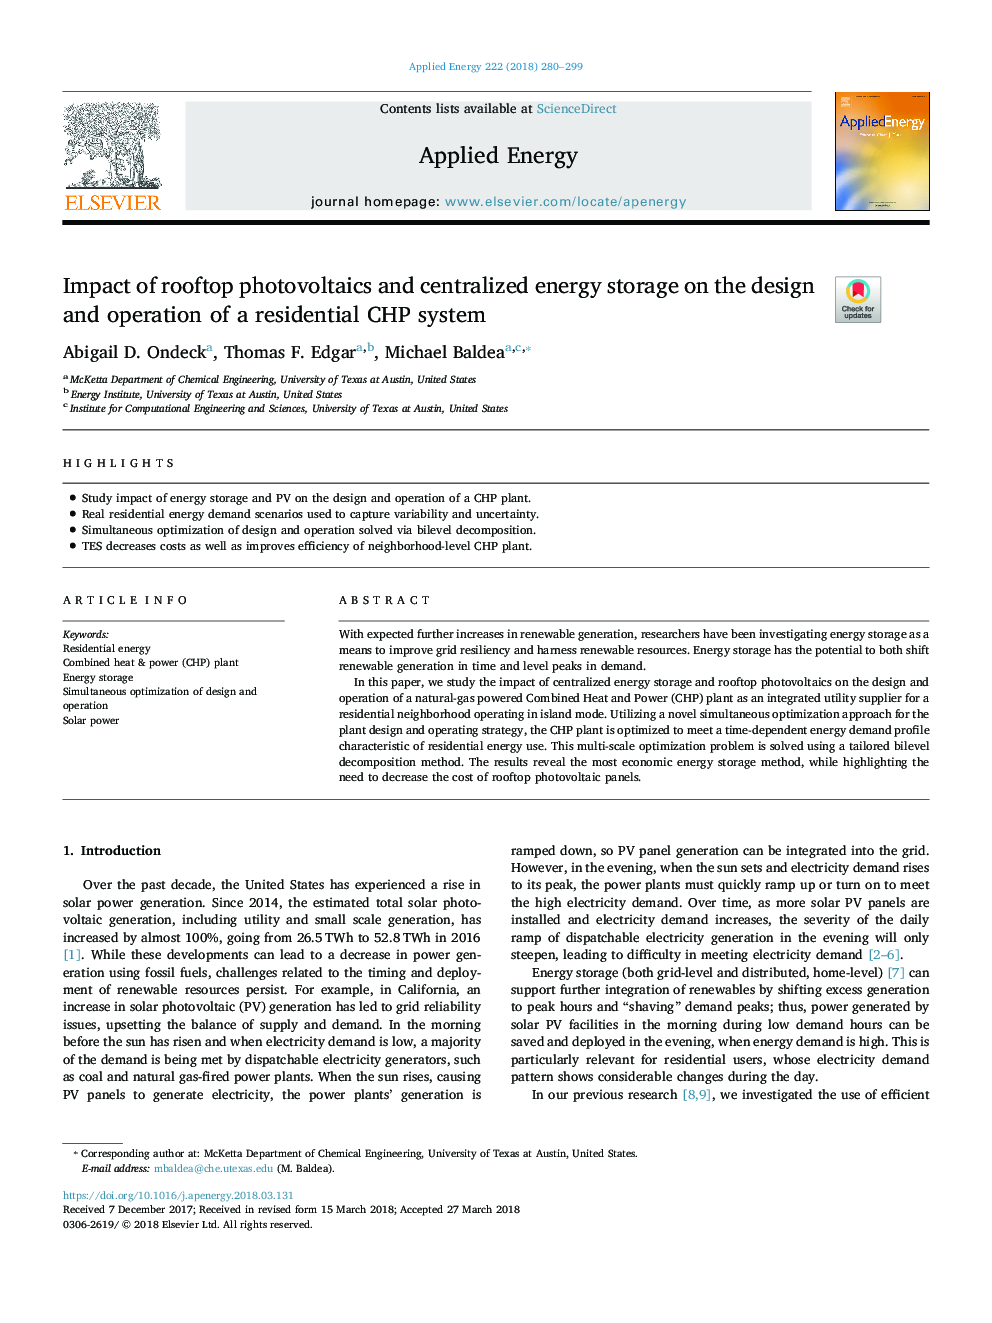 Impact of rooftop photovoltaics and centralized energy storage on the design and operation of a residential CHP system